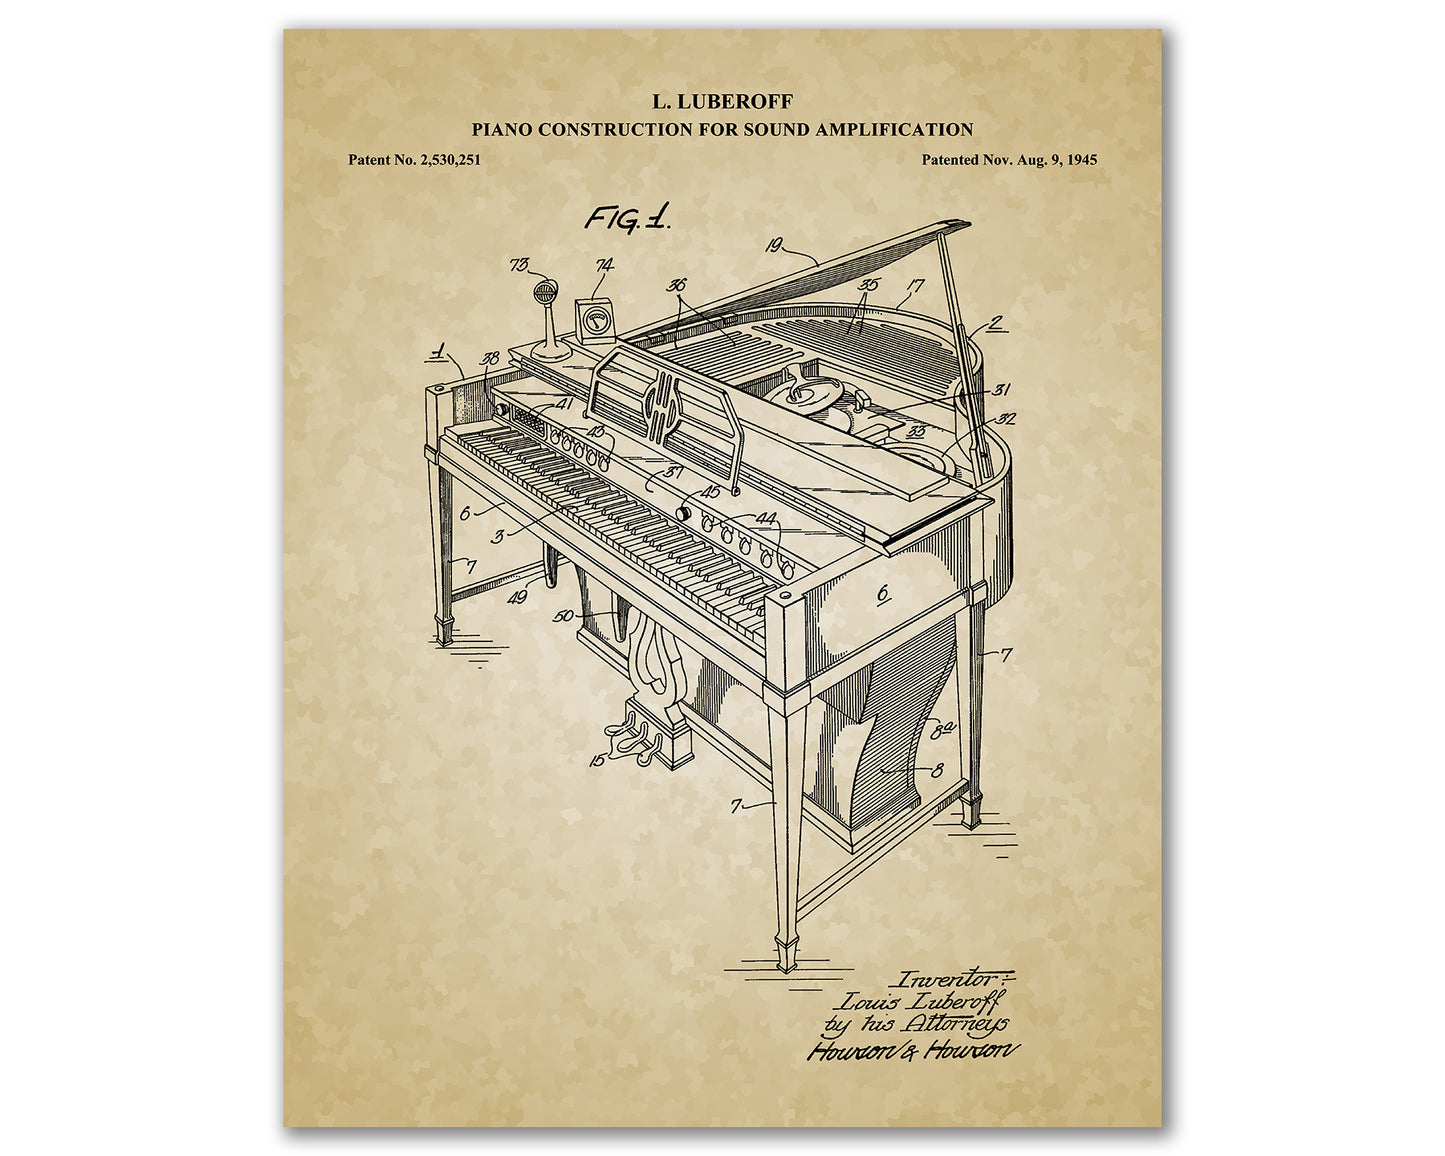 Grand Piano Patent Drawings, Music Studio Wall Art Poster, Great Vintage Room Decor, Art Prints, Musician Decor Gifts 03052